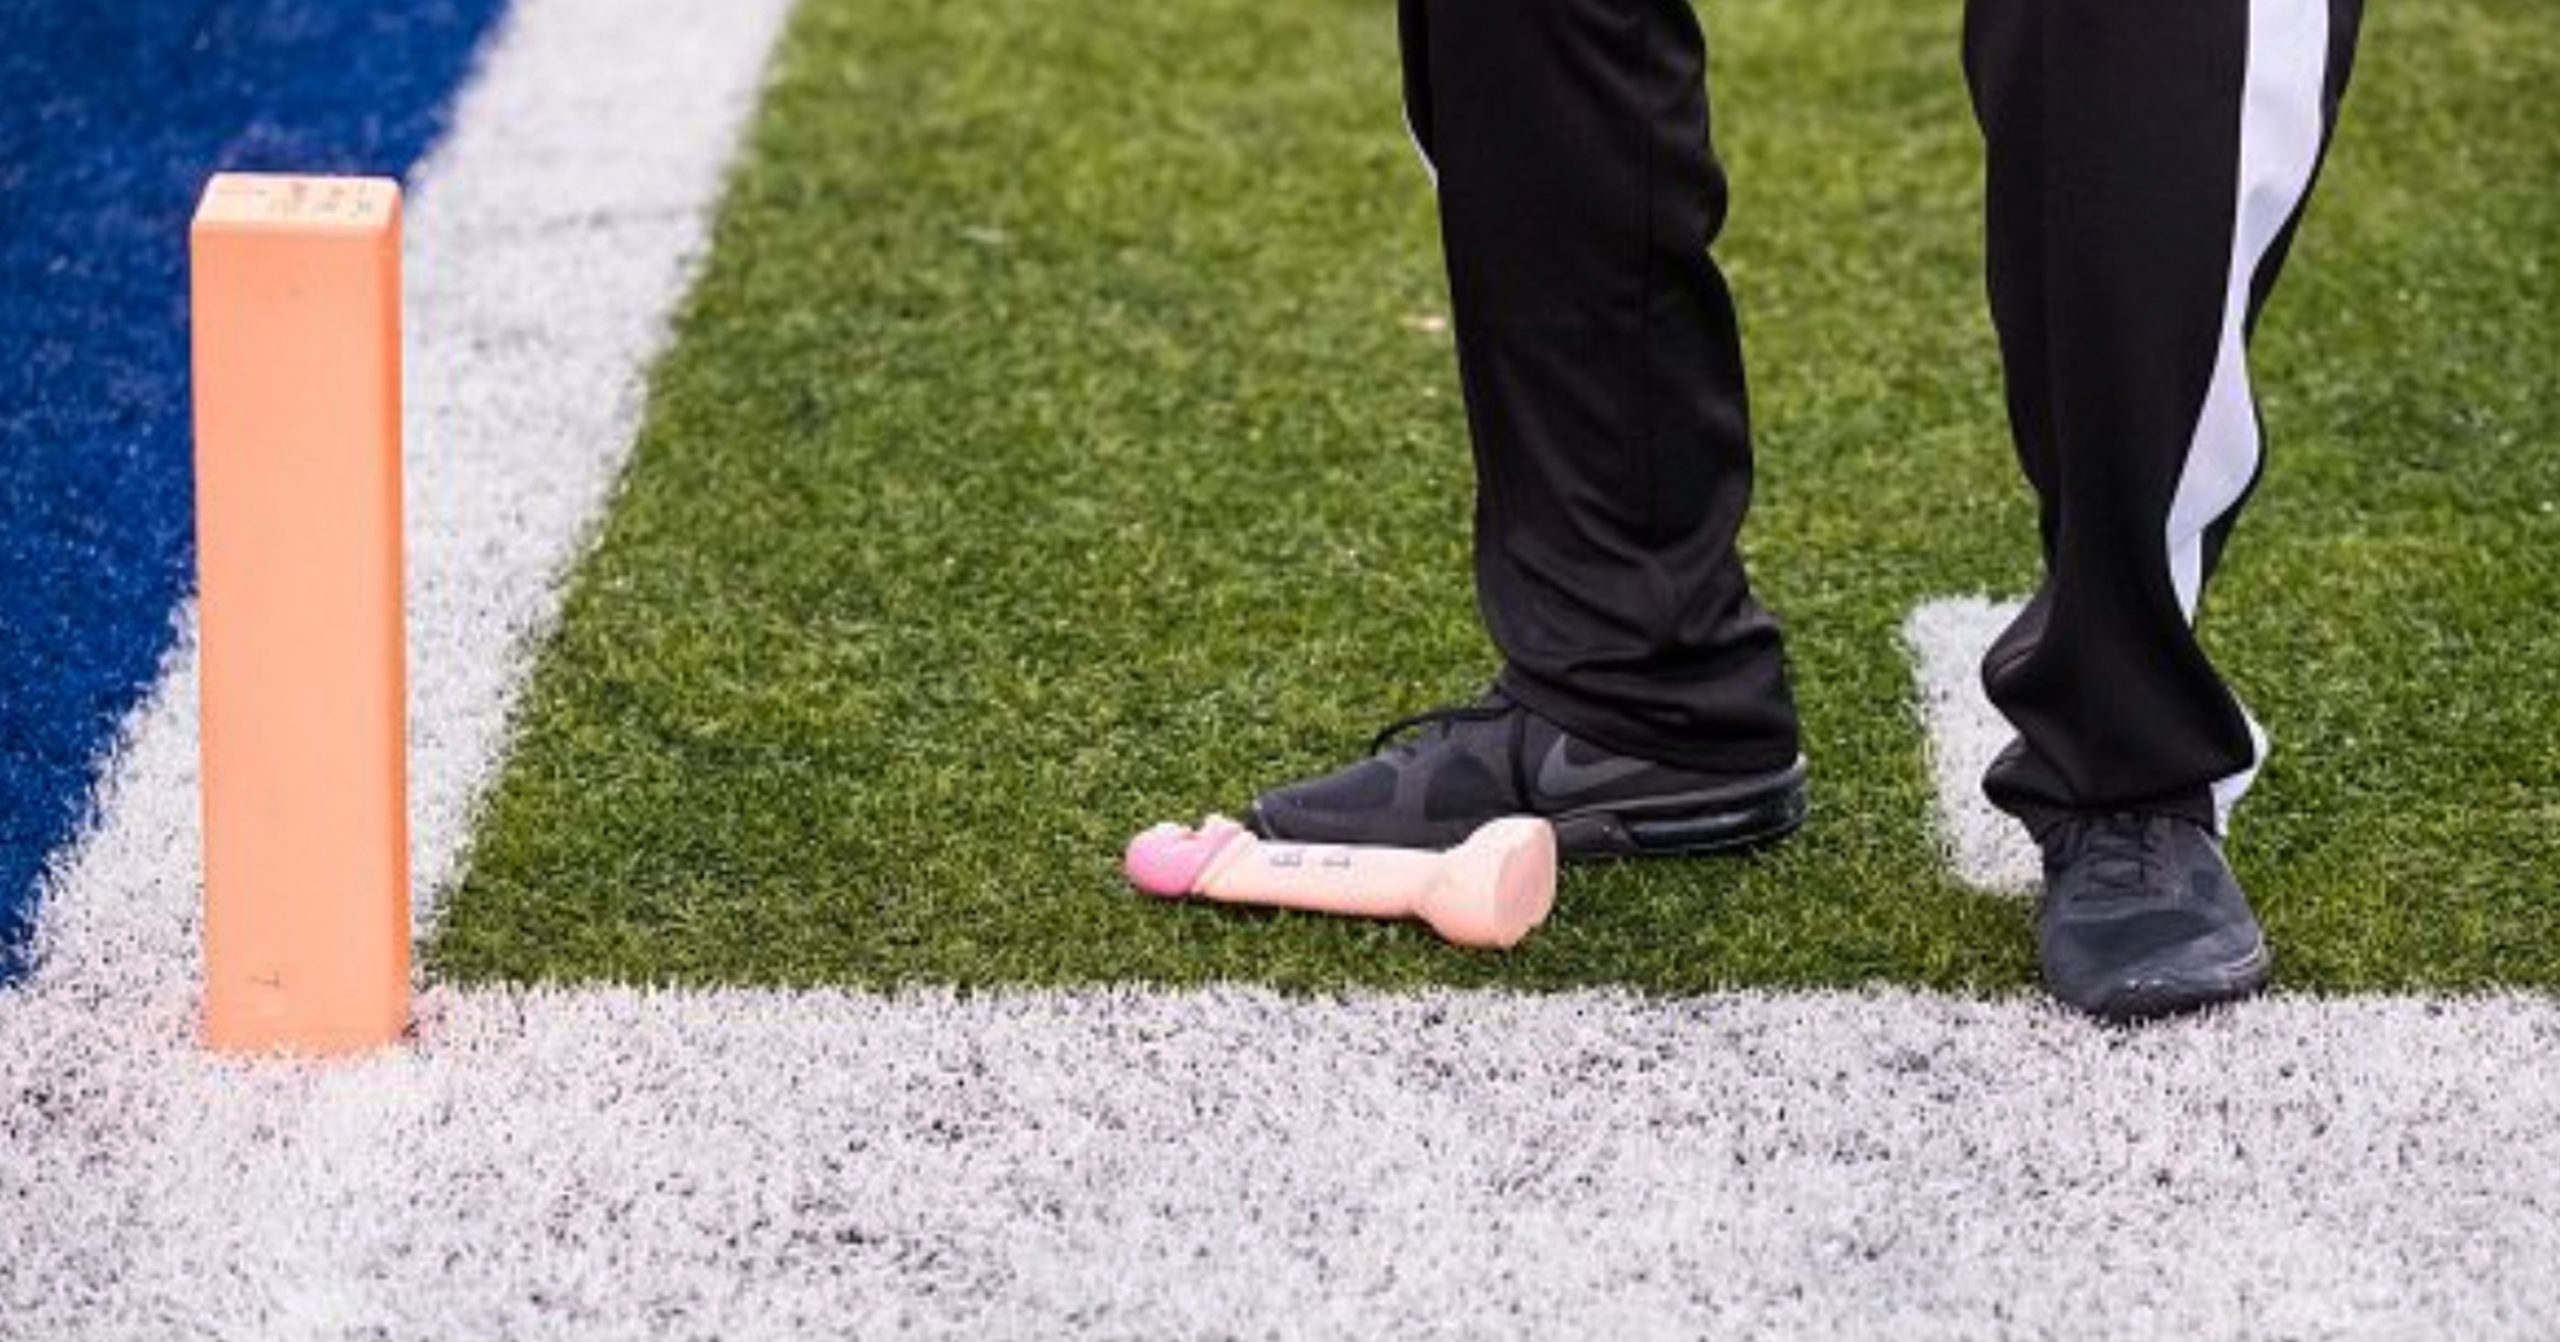 Money Line On If Dildo Will Get Thrown On Field During Bills-Patriots Game  Currently At -140